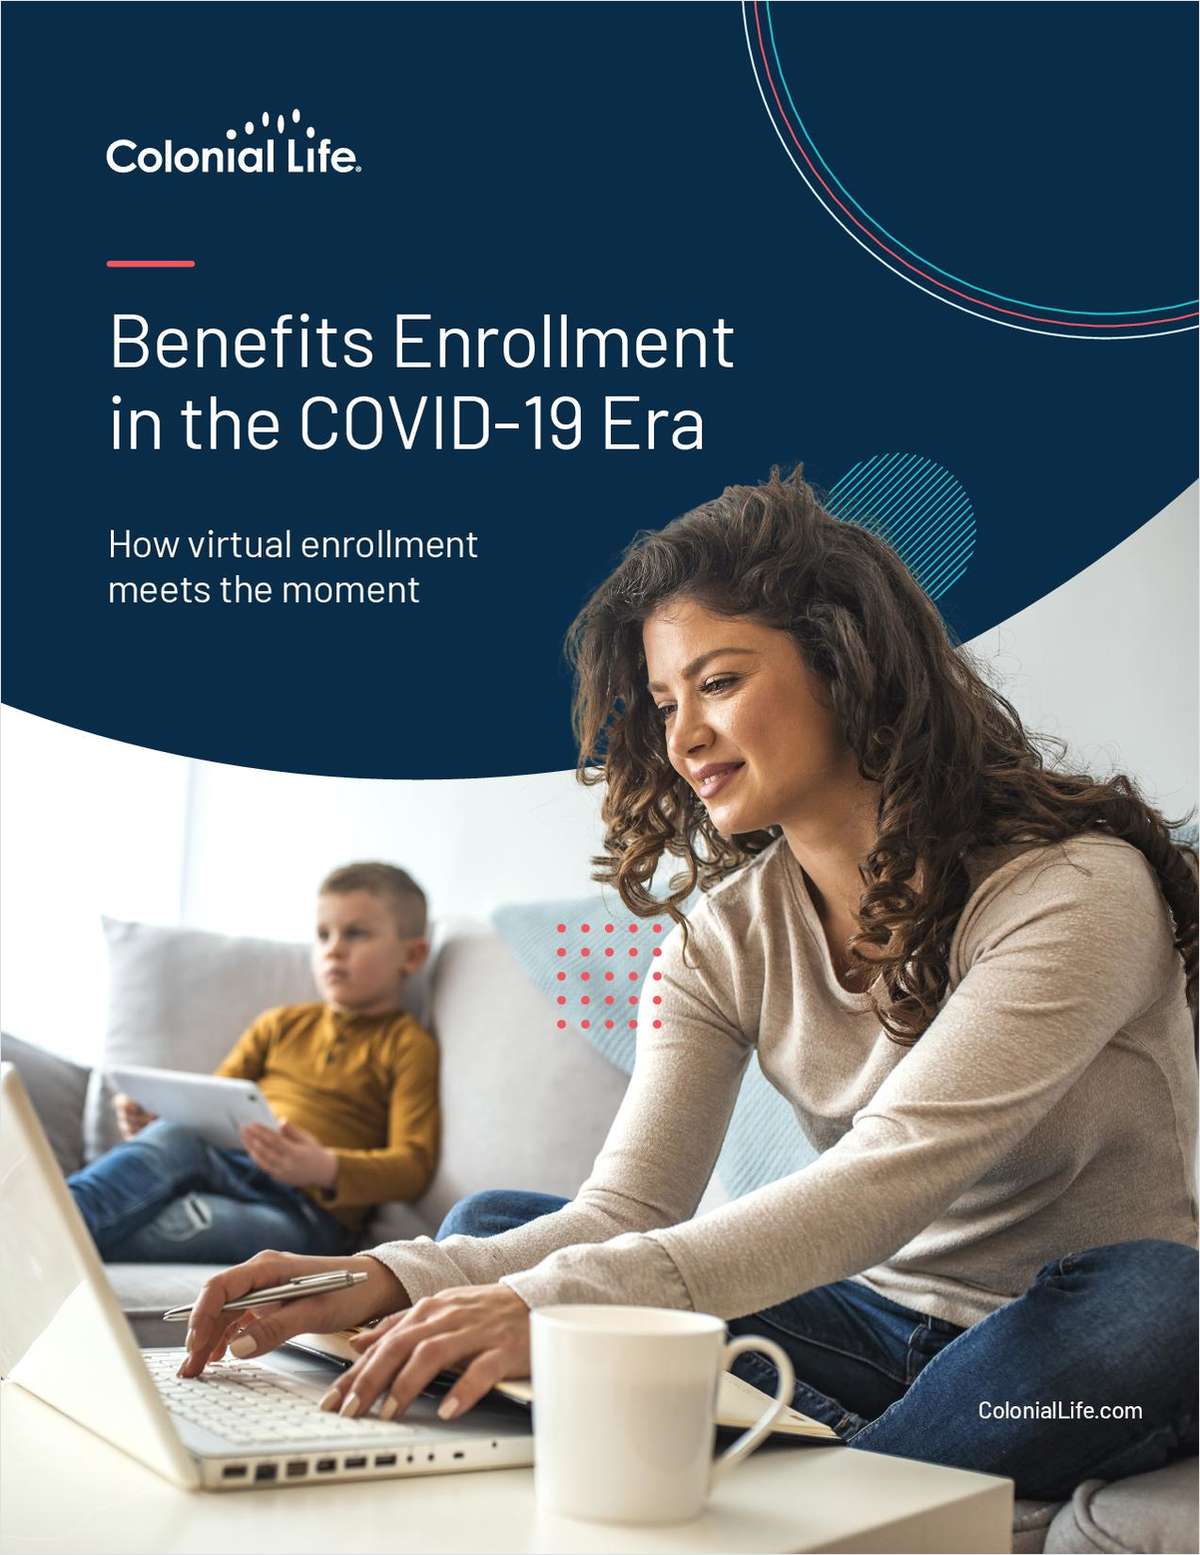 Leaning into Benefits Enrollment in the COVID Era